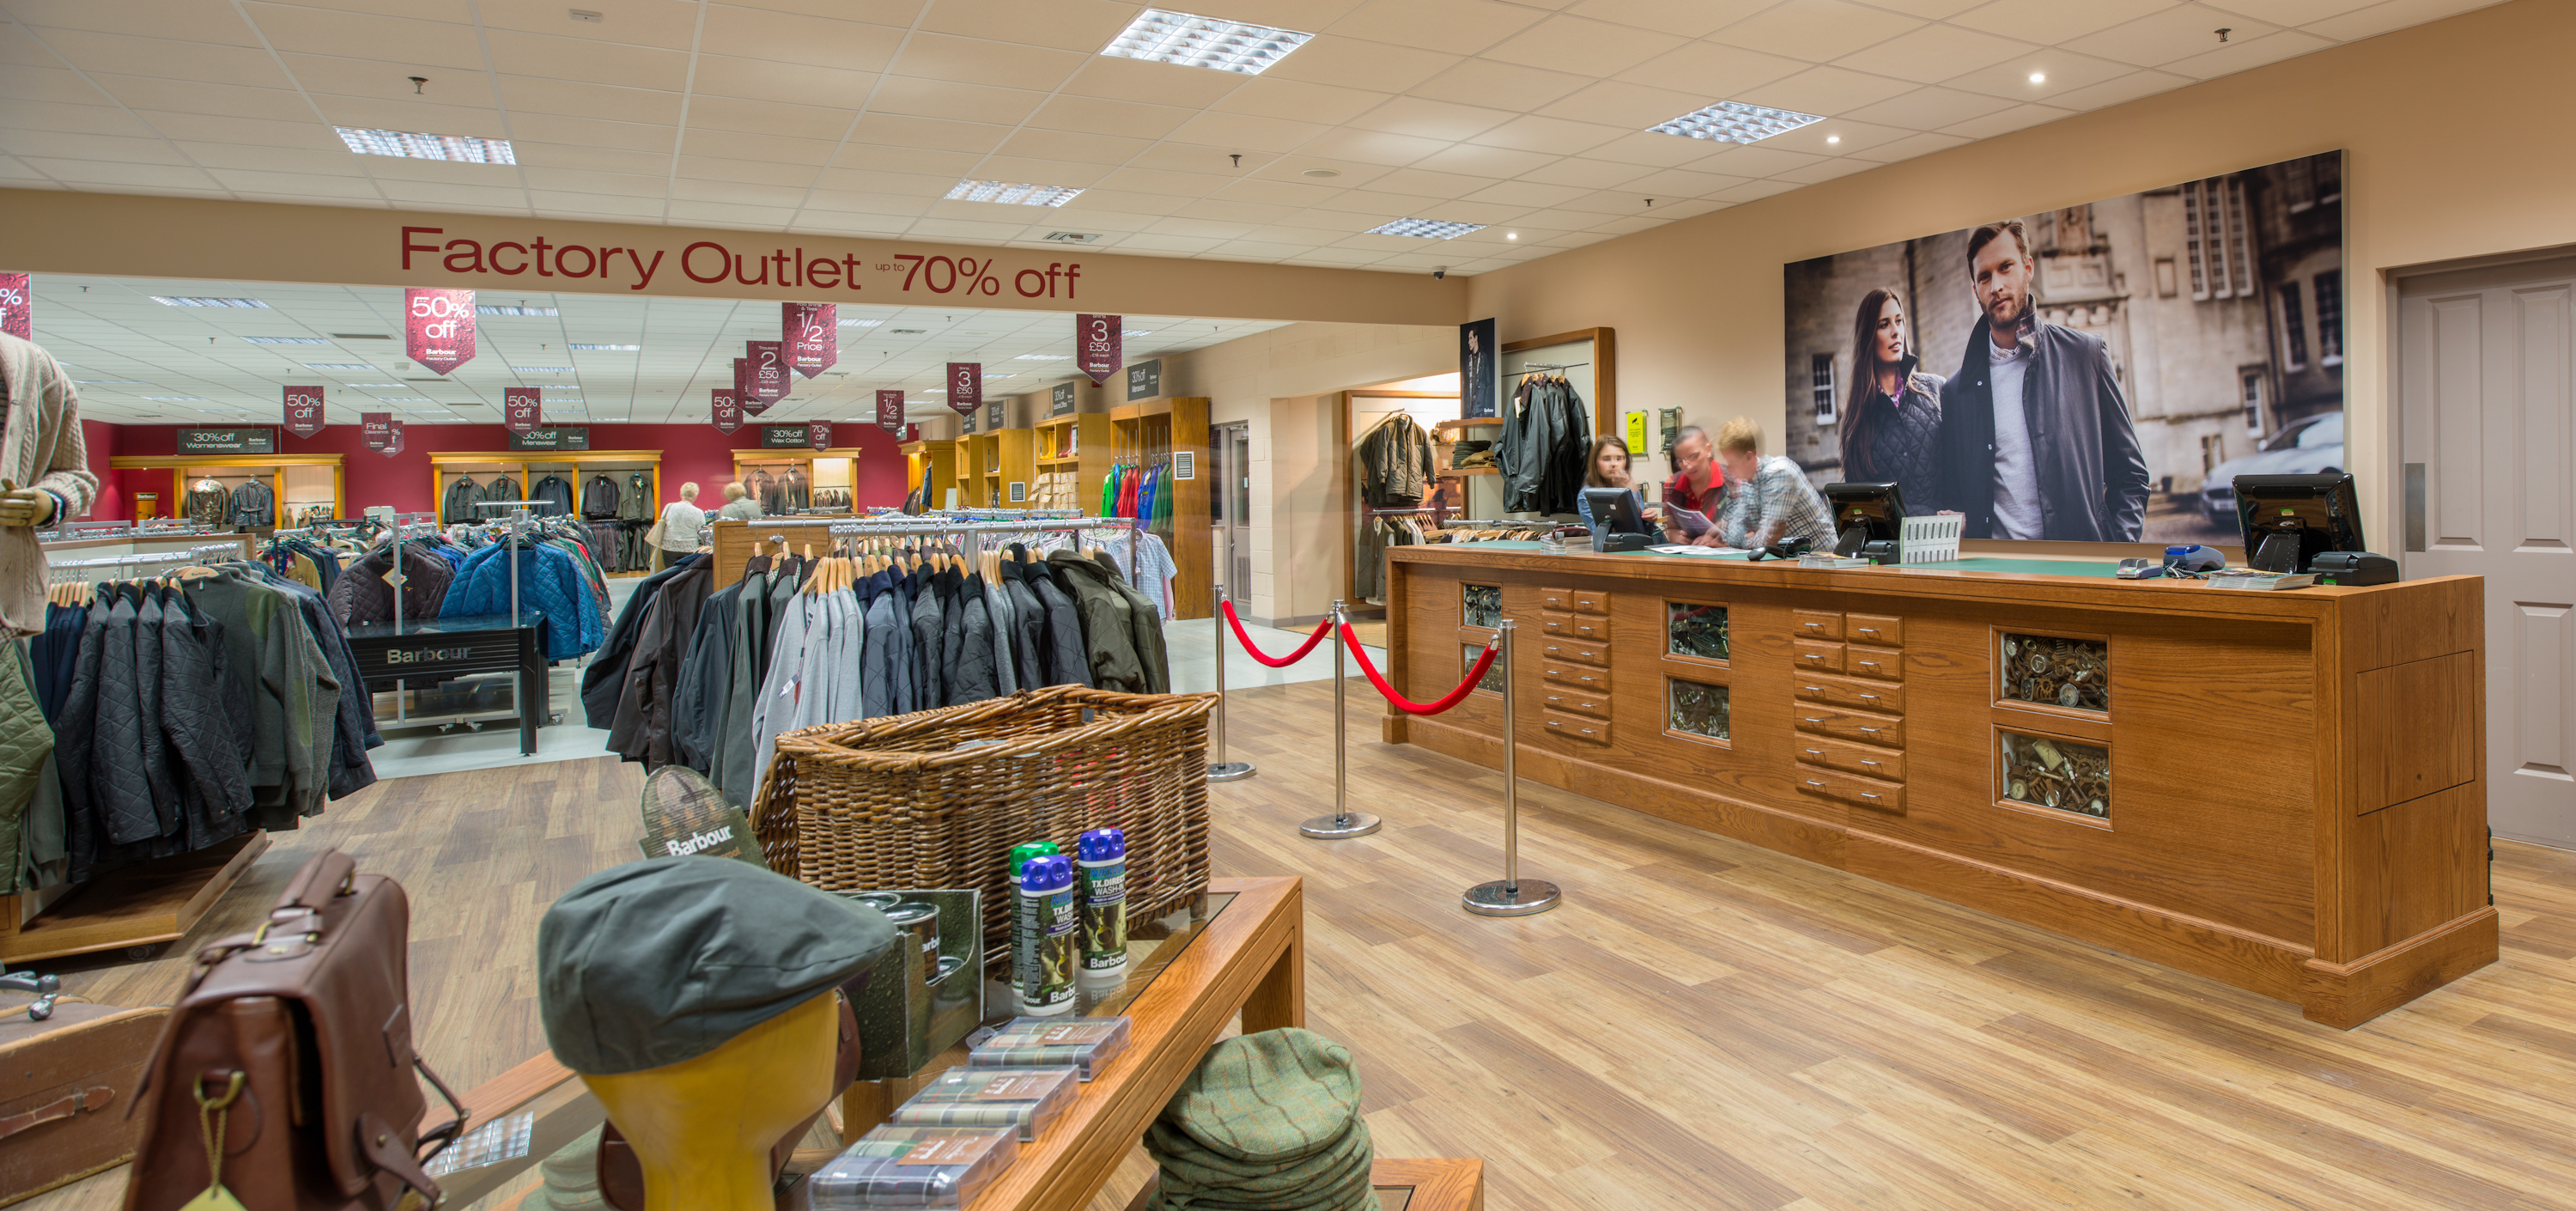 Best outlet shops - Shopping - Time Out London